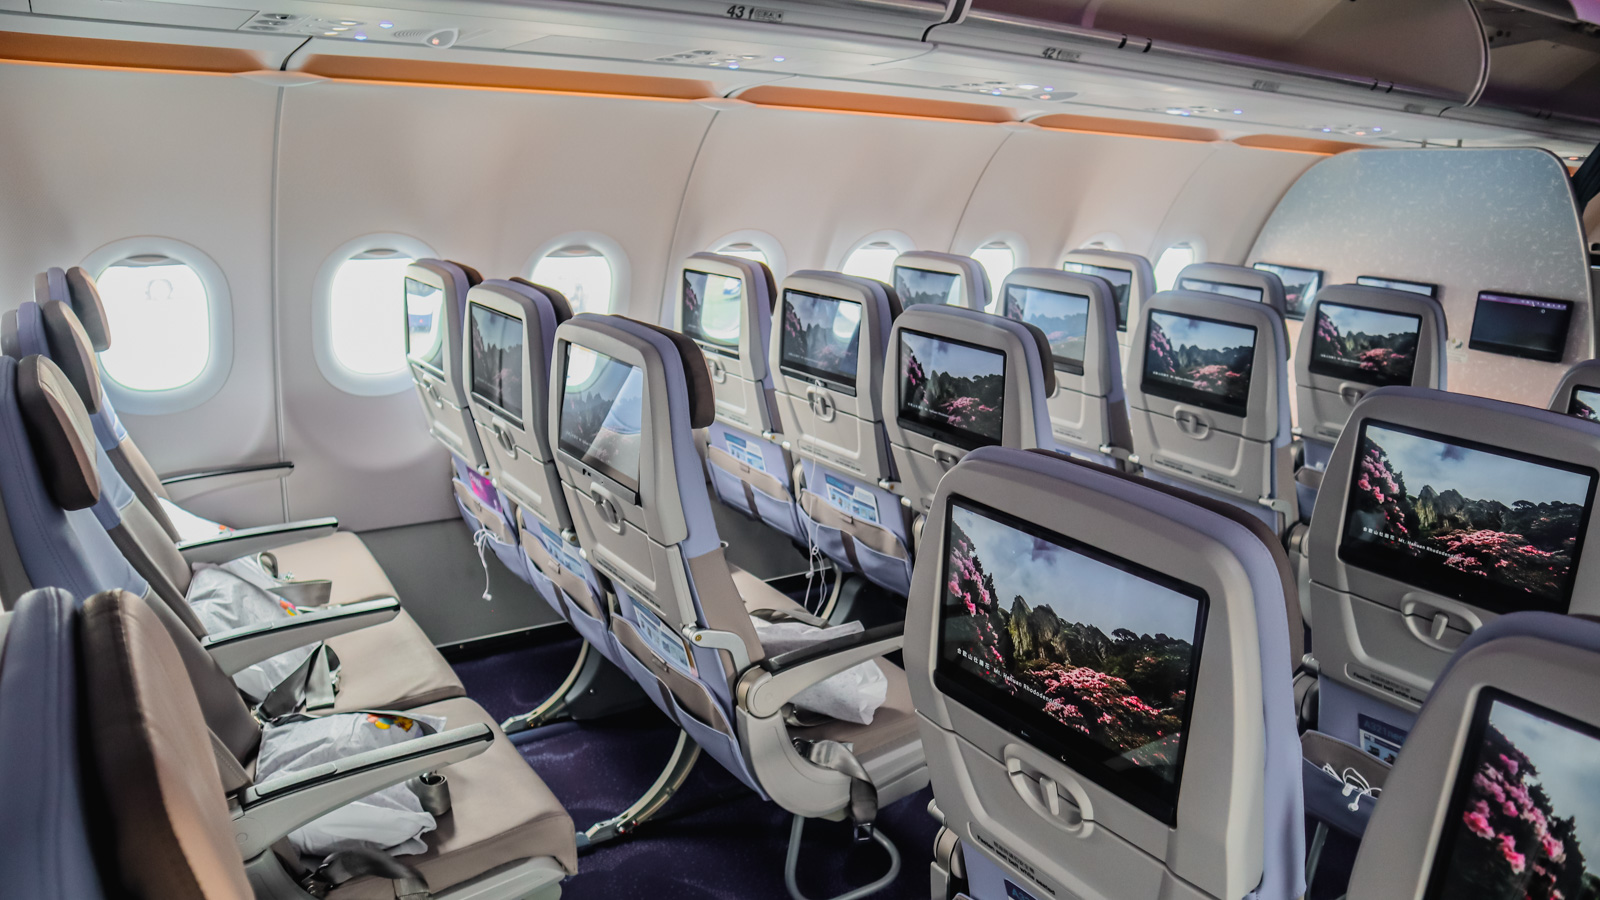 Economy cabin view of China Airlines A321neo